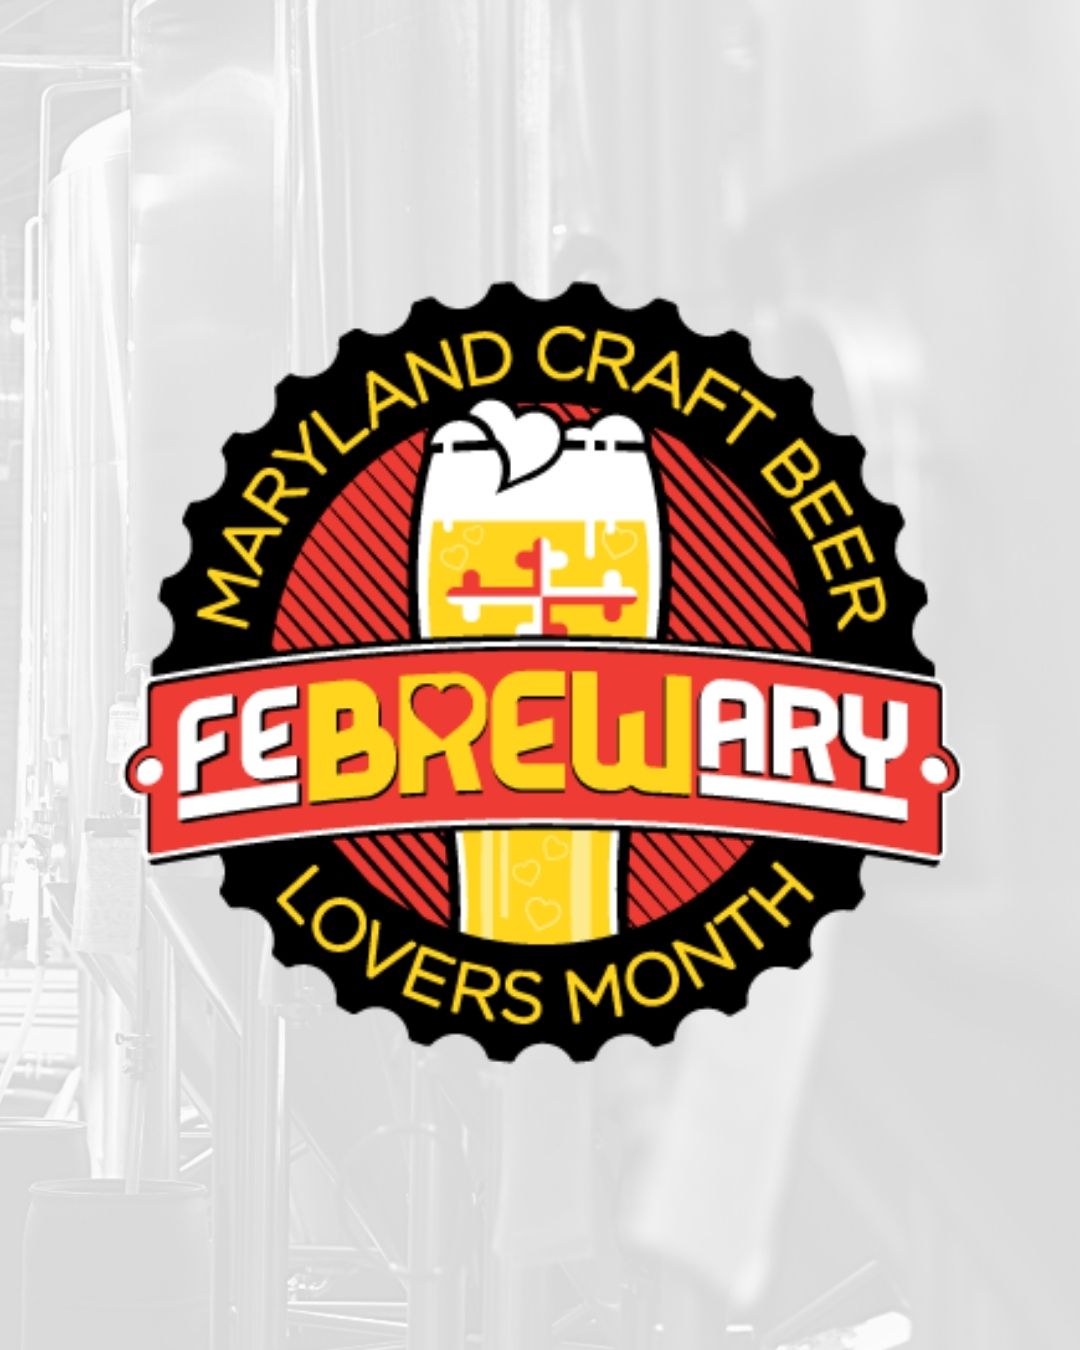 Local Breweries Look Forward To Observing FeBREWary